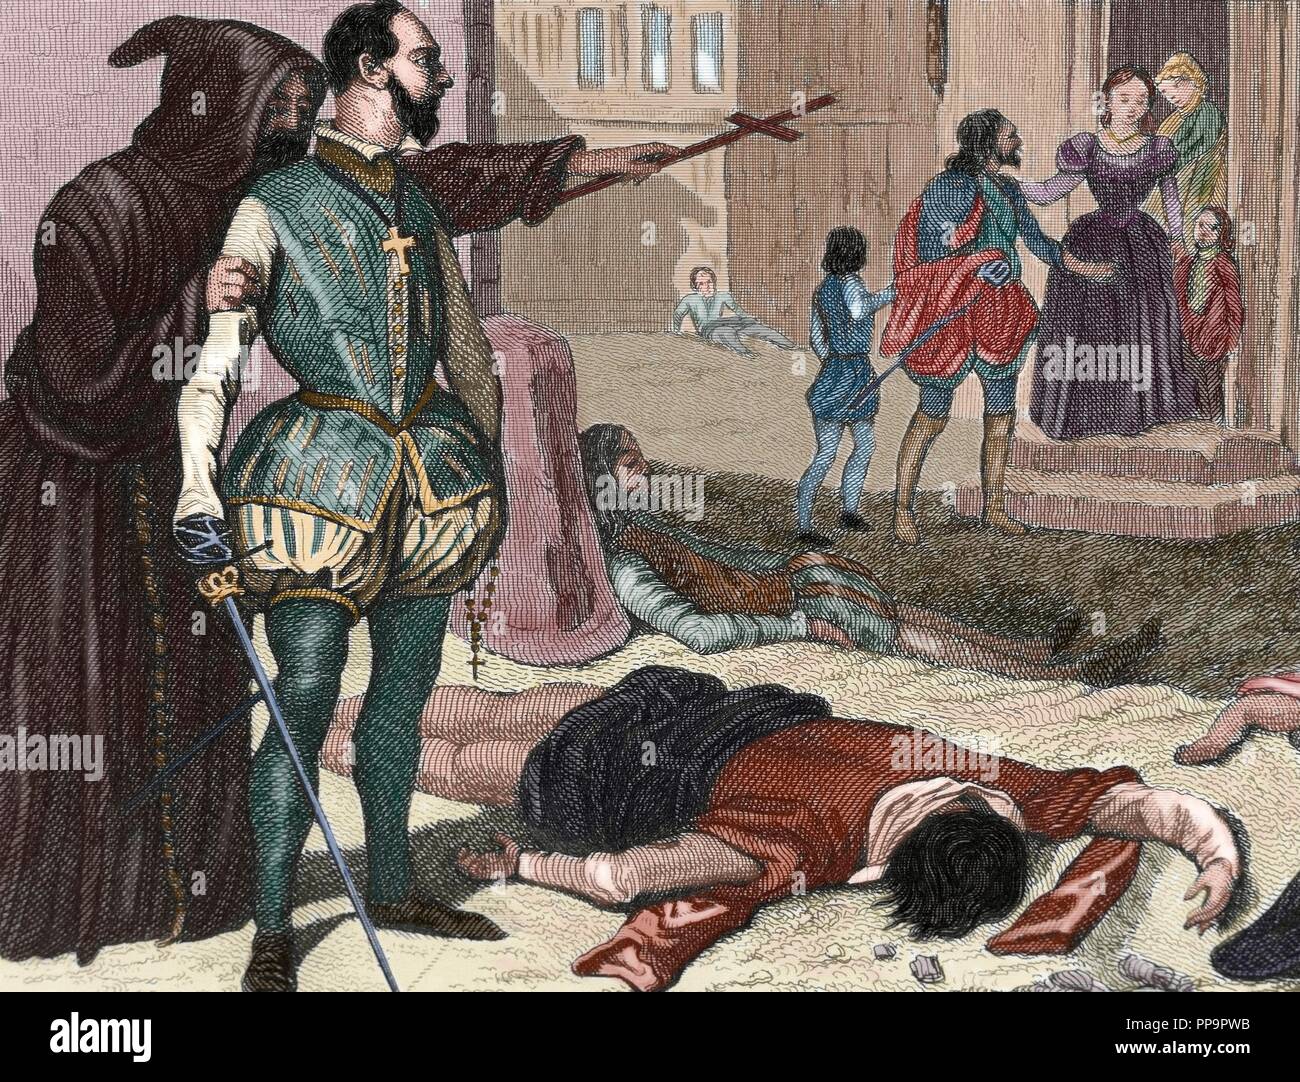 France. French Wars of Religion. St. Batholomew's Day massacre, 1572. Assassinations of Catholic violence against the Huguenots, the French Calvinist Protestants. Engraving. 19th century. Colored. Stock Photo